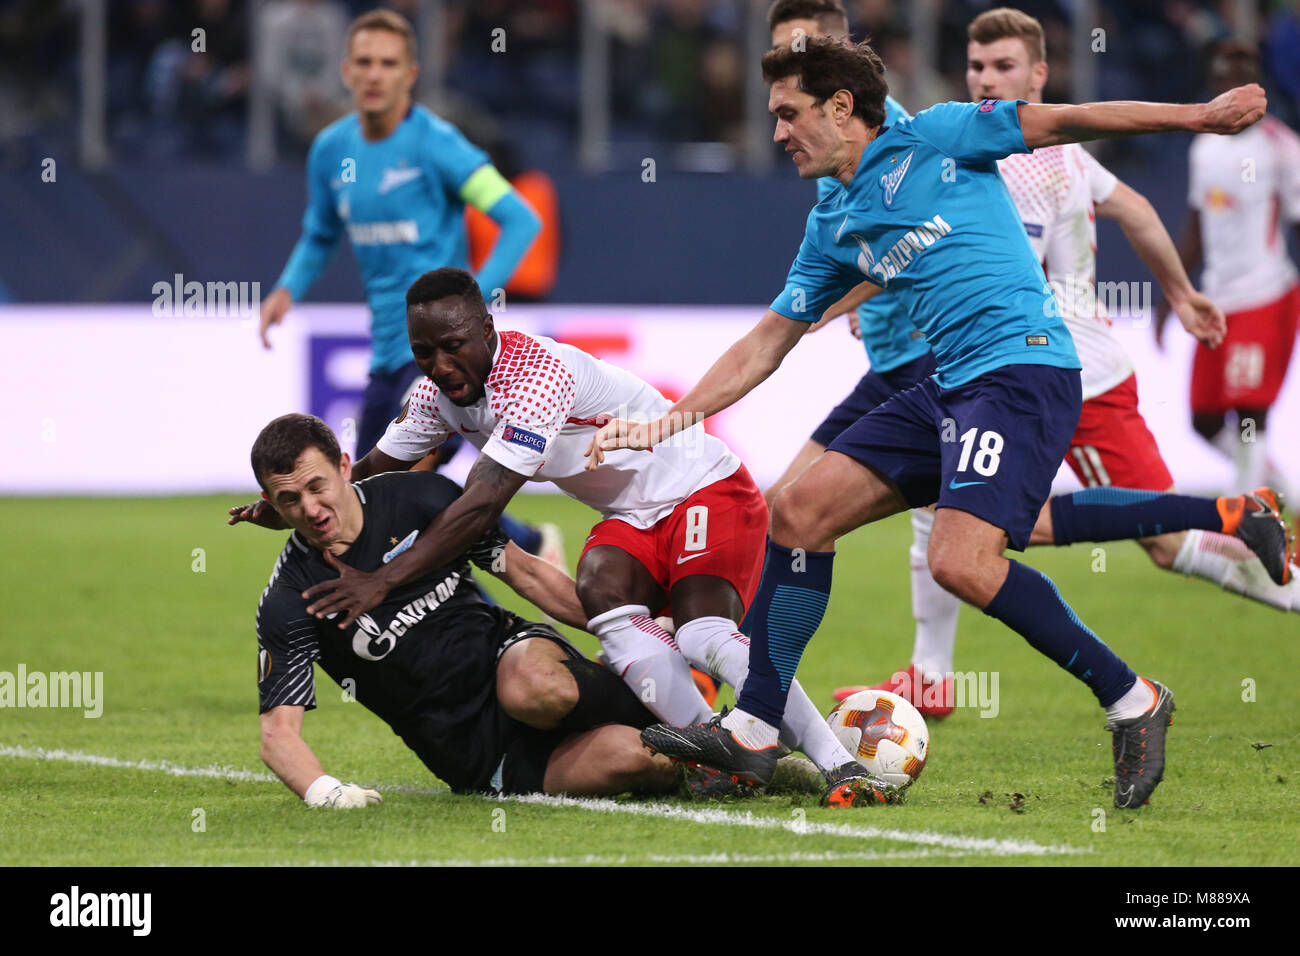 Saint Petersburg, Russia. 15th Mar, 2018. Andrei Lunev (L), Yuri Zhirkov of FC Zenit Saint Petersburg and Naby KeÃ¯ta (C) of RB Leipzig vie for the ball during the UEFA Europa League Round of 16 2nd leg football match between FC Zenit Saint Petersburg and RB Leipzig at Saint Petersburg Stadium. Credit: Igor Russak/SOPA Images/ZUMA Wire/Alamy Live News Stock Photo